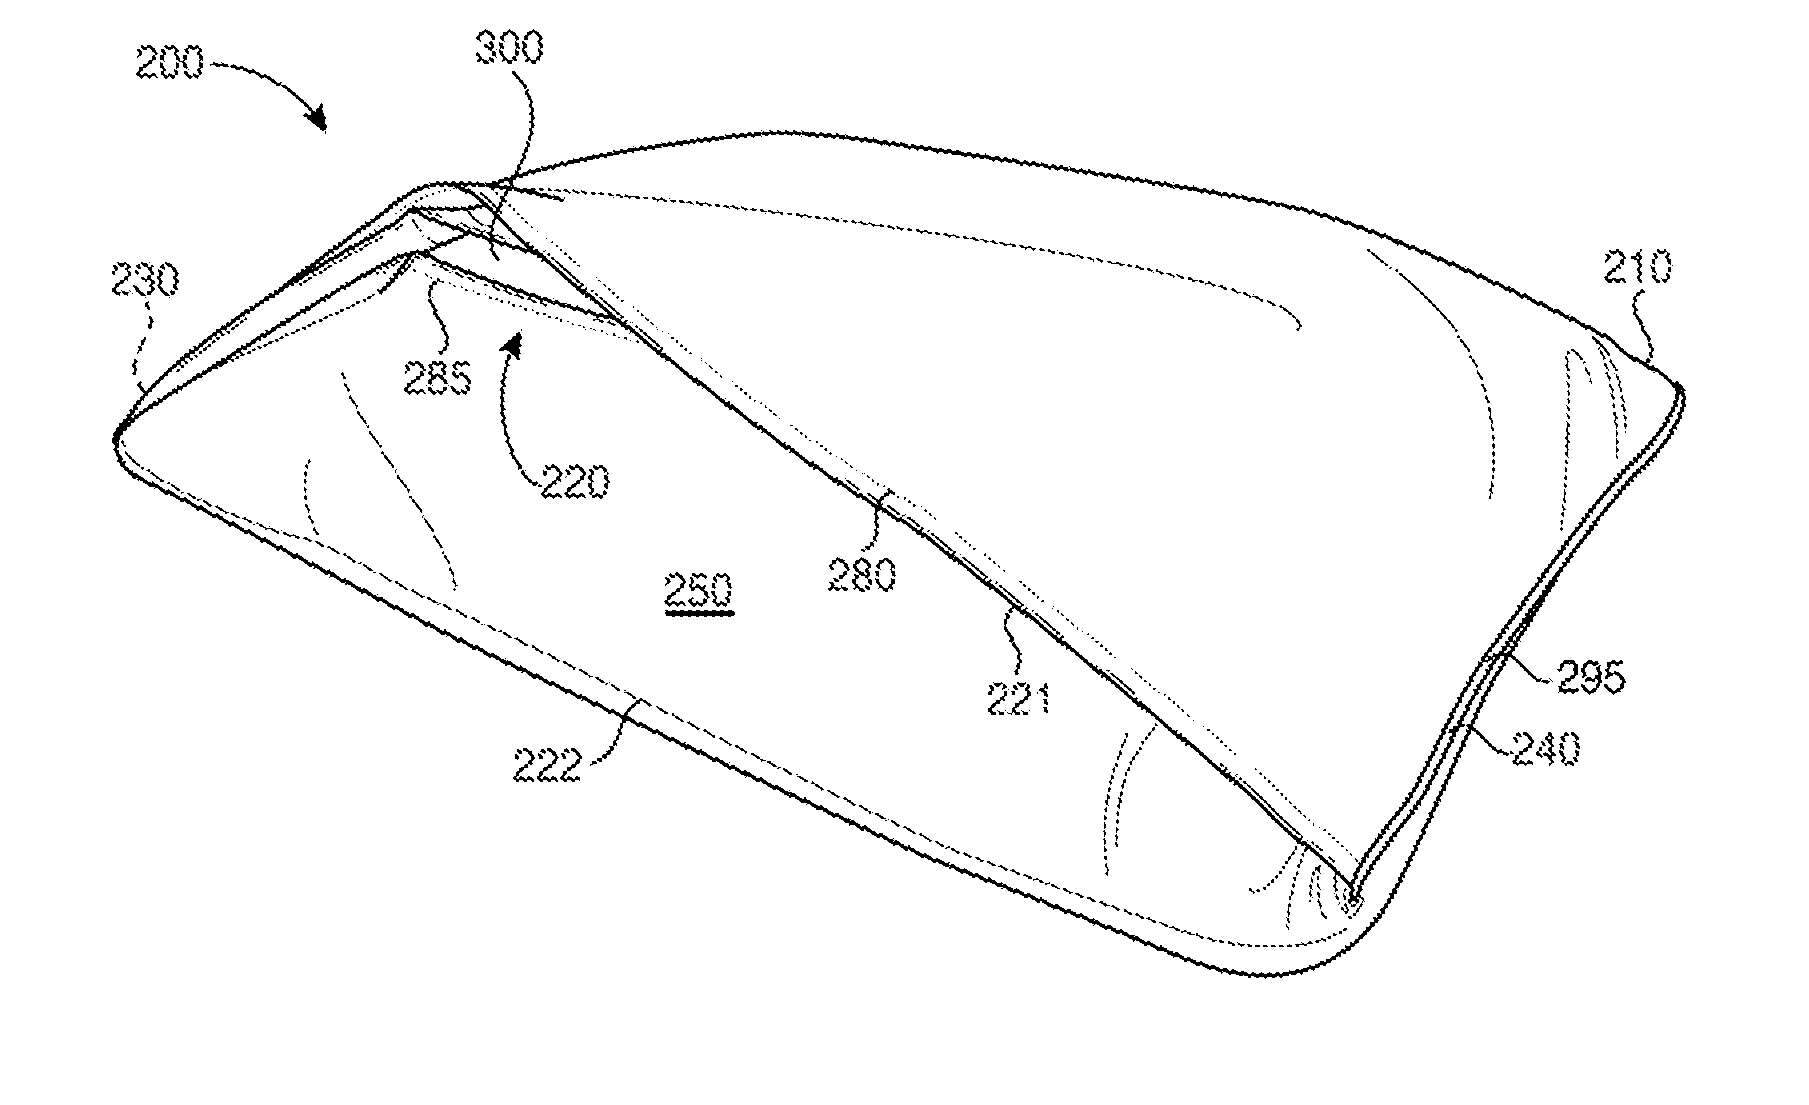 Pillowcase construction and method of using same